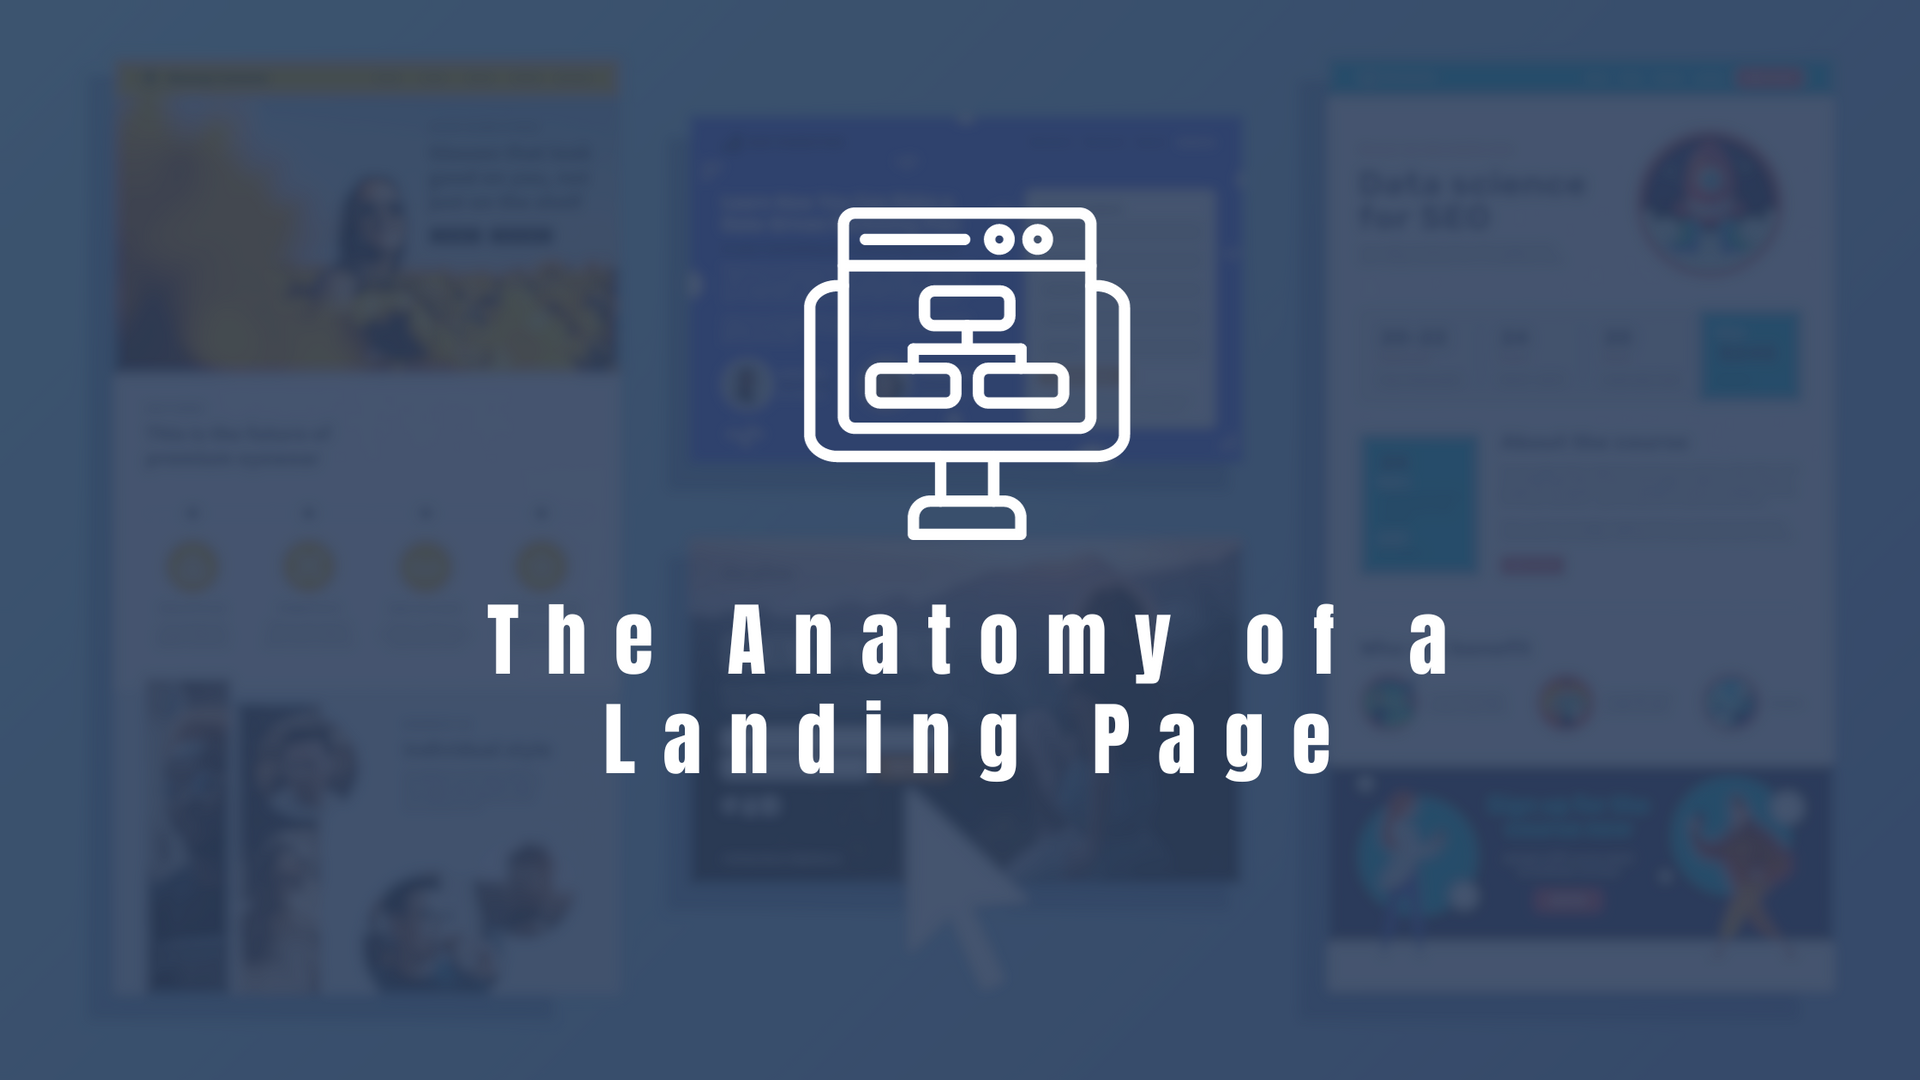 The Anatomy of a Landing Page